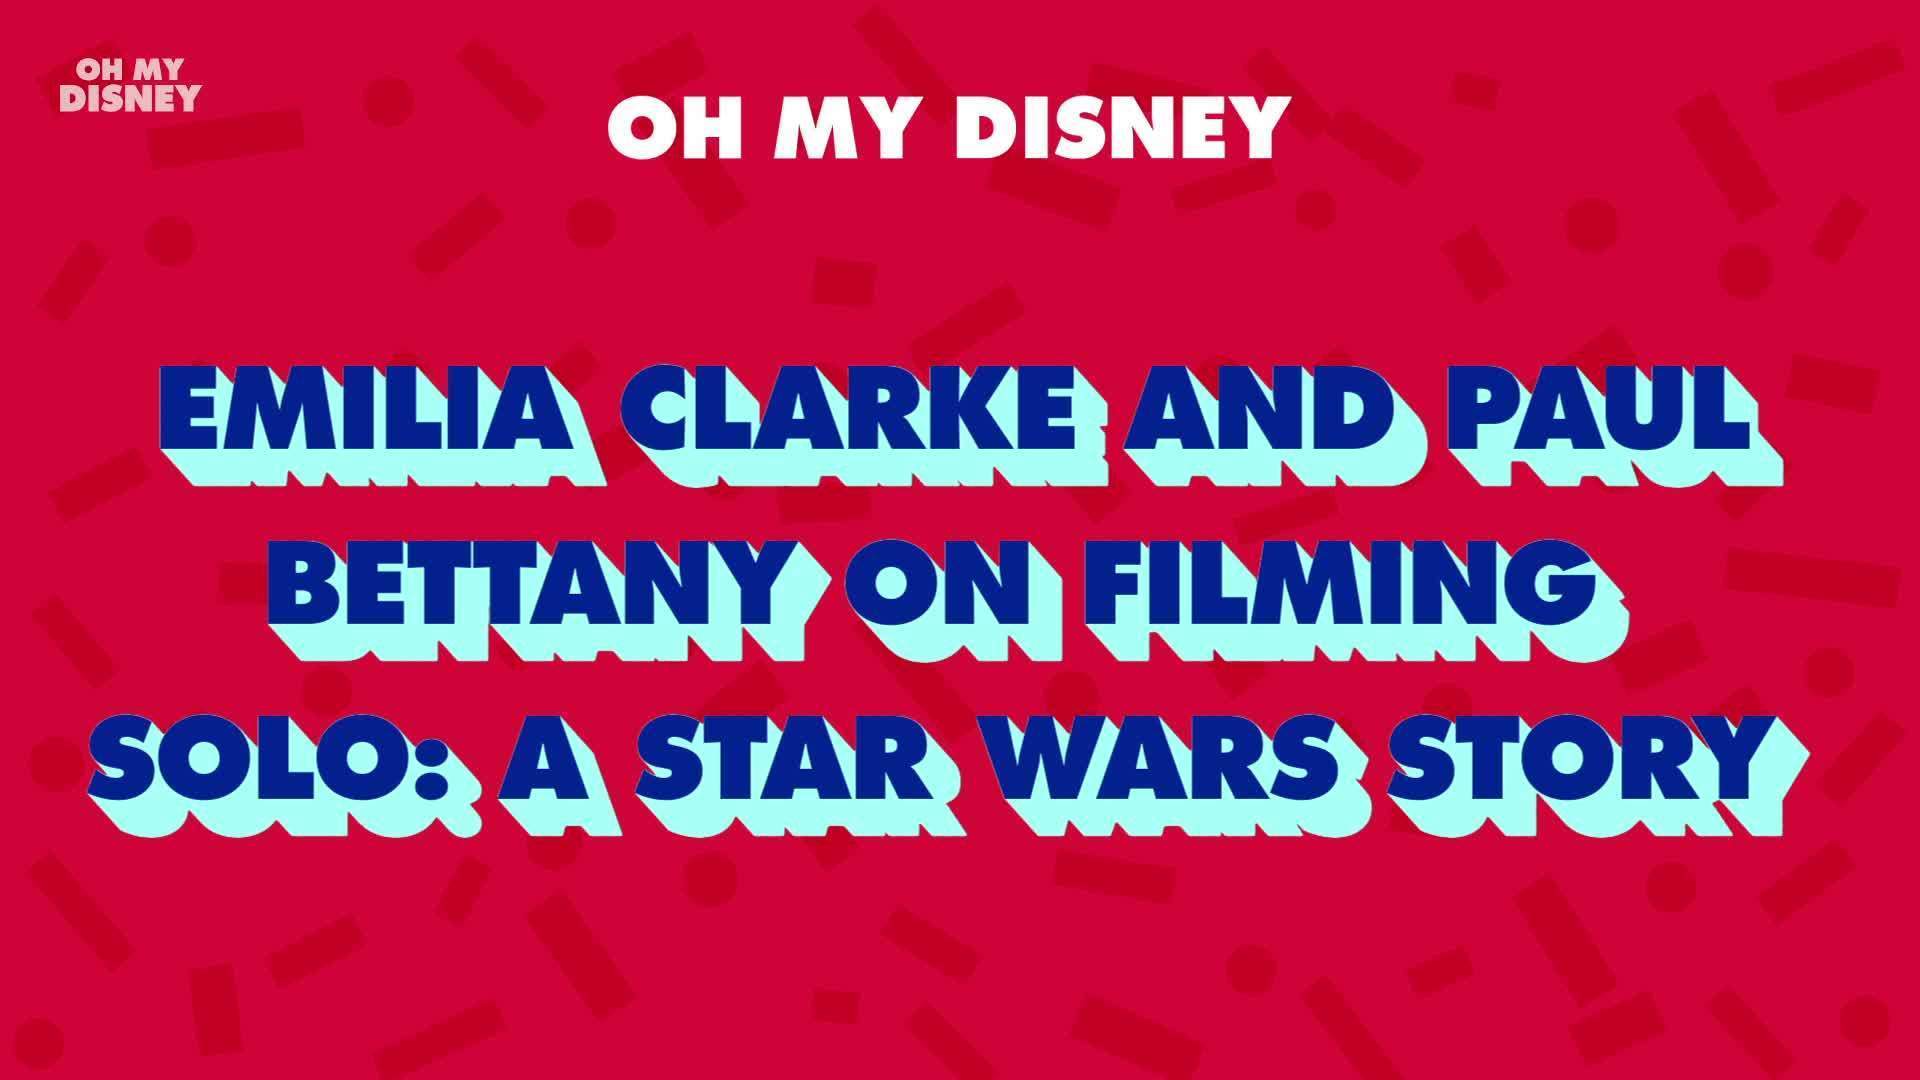 Emilia Clarke & Paul Bettany on Filming Solo: A Star Wars Story | Oh My Disney Show by Oh My Disney